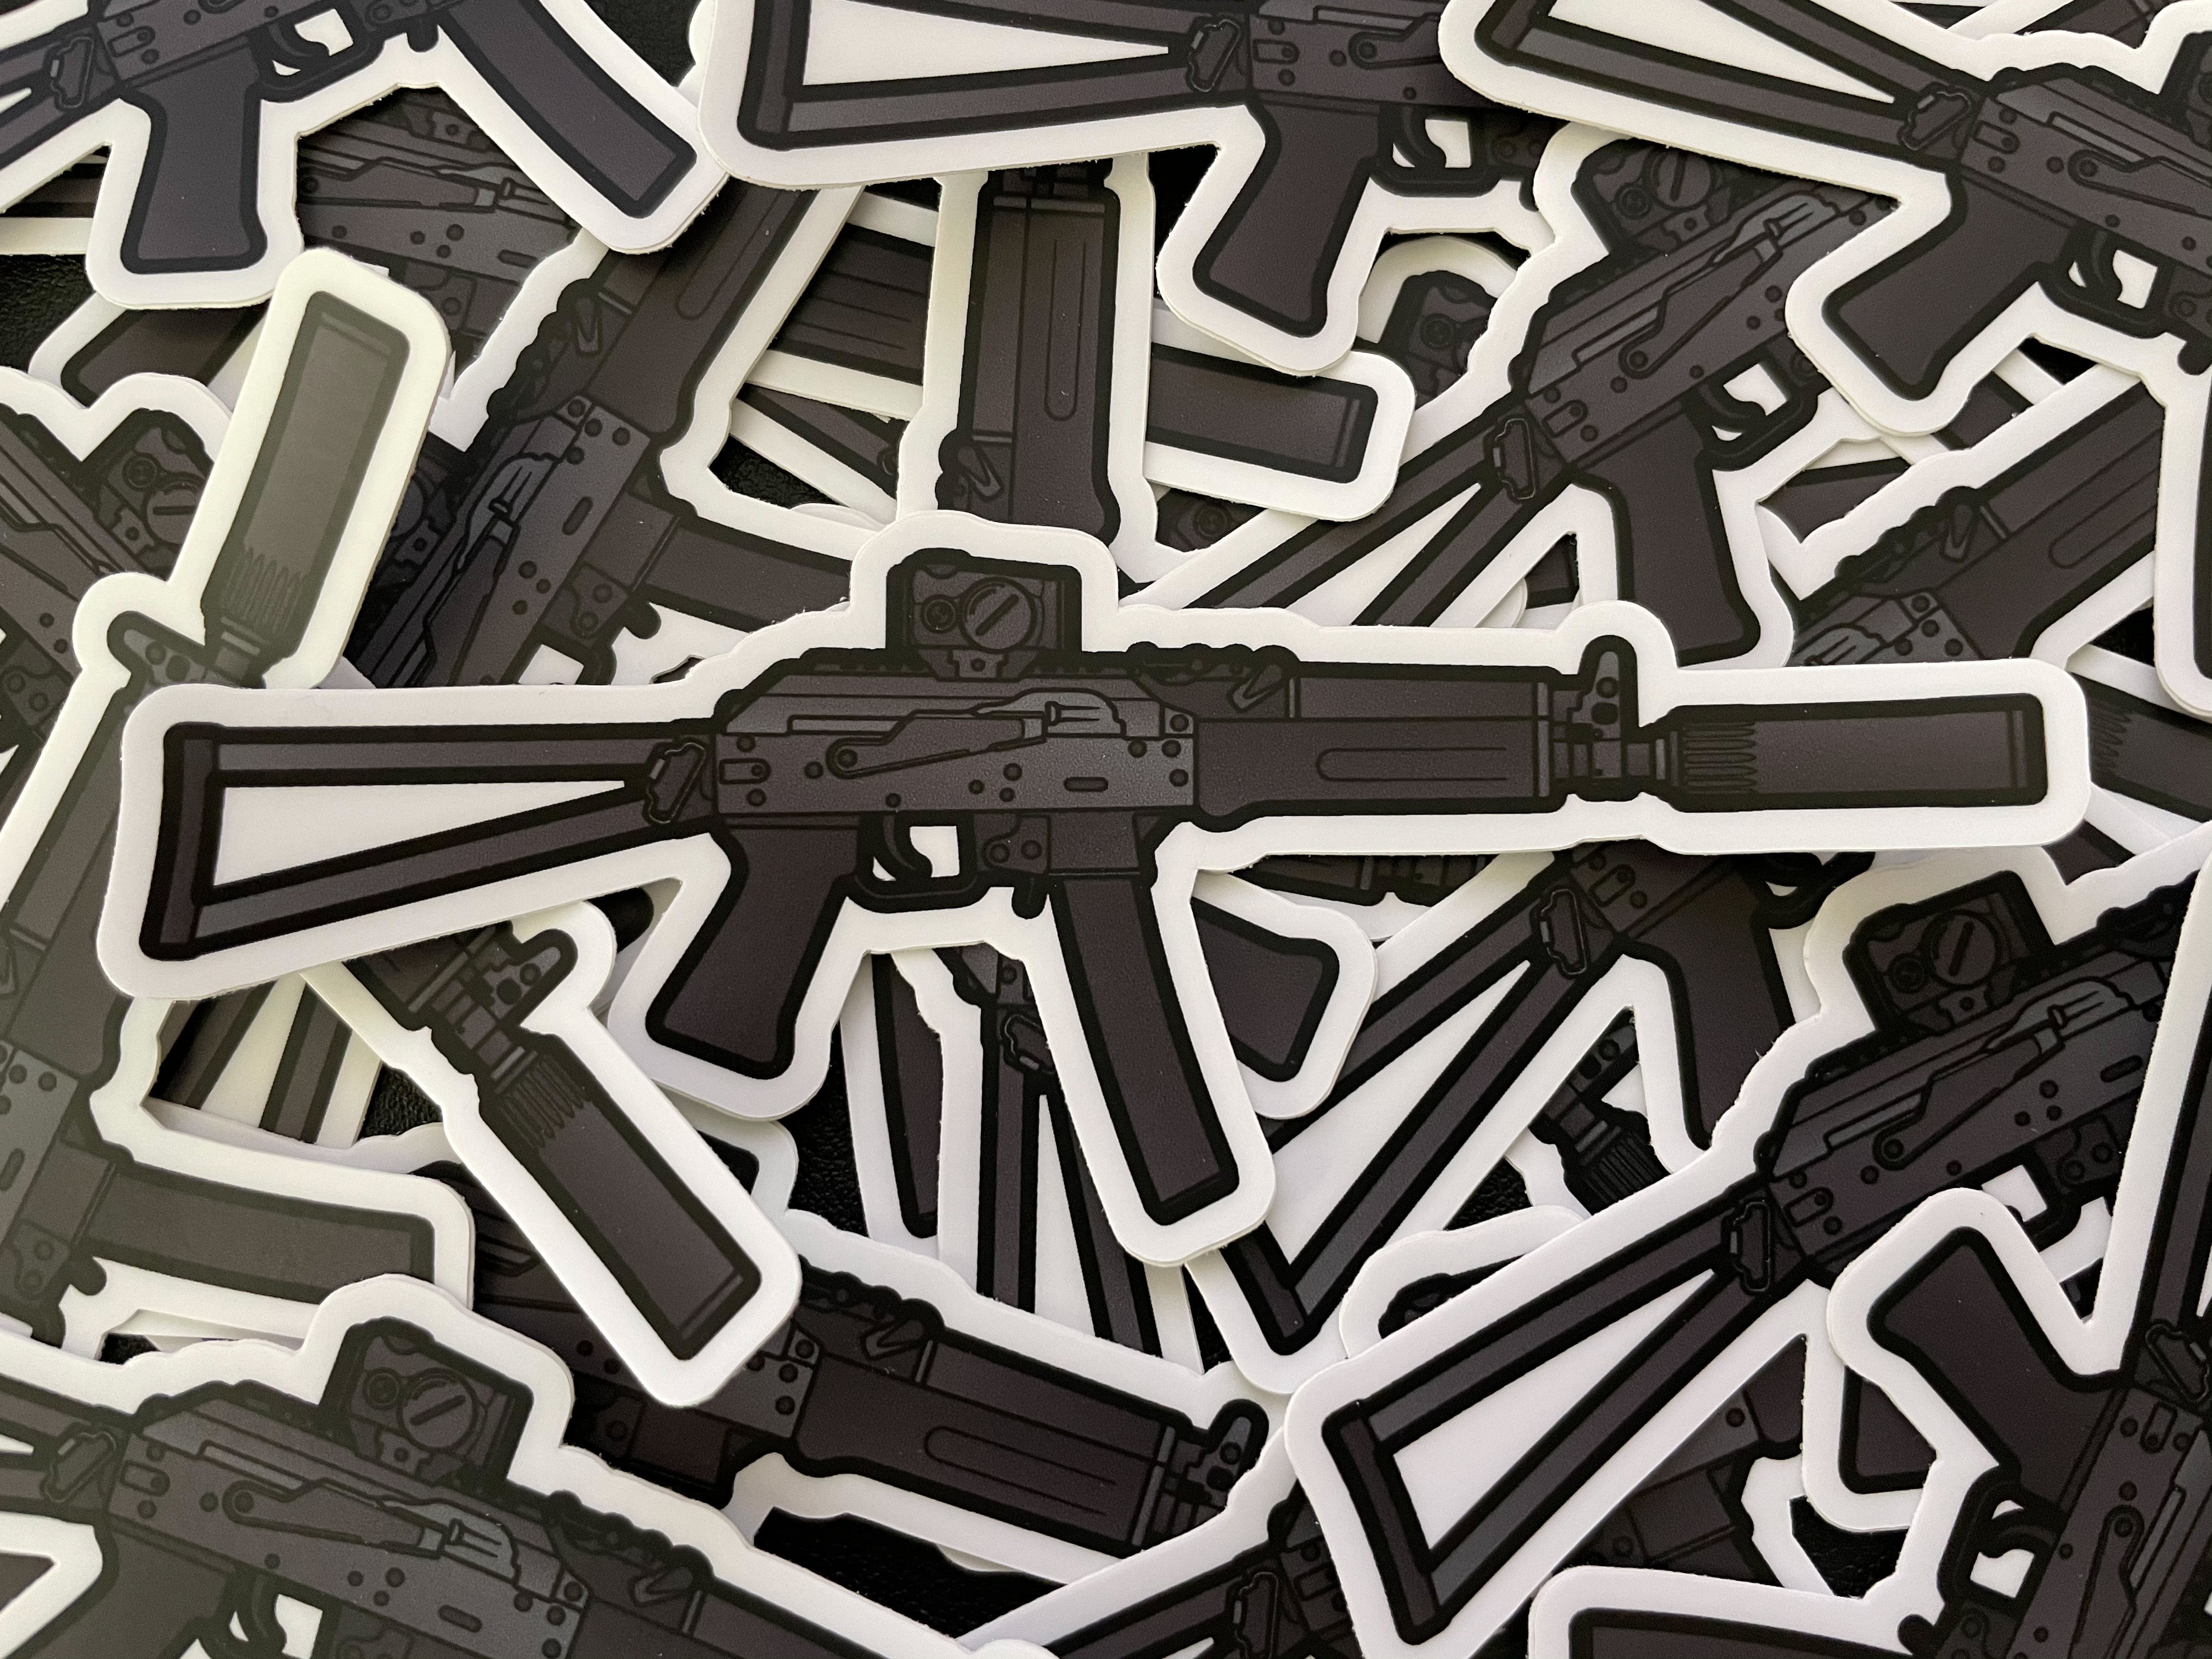 KP-9 Stickers